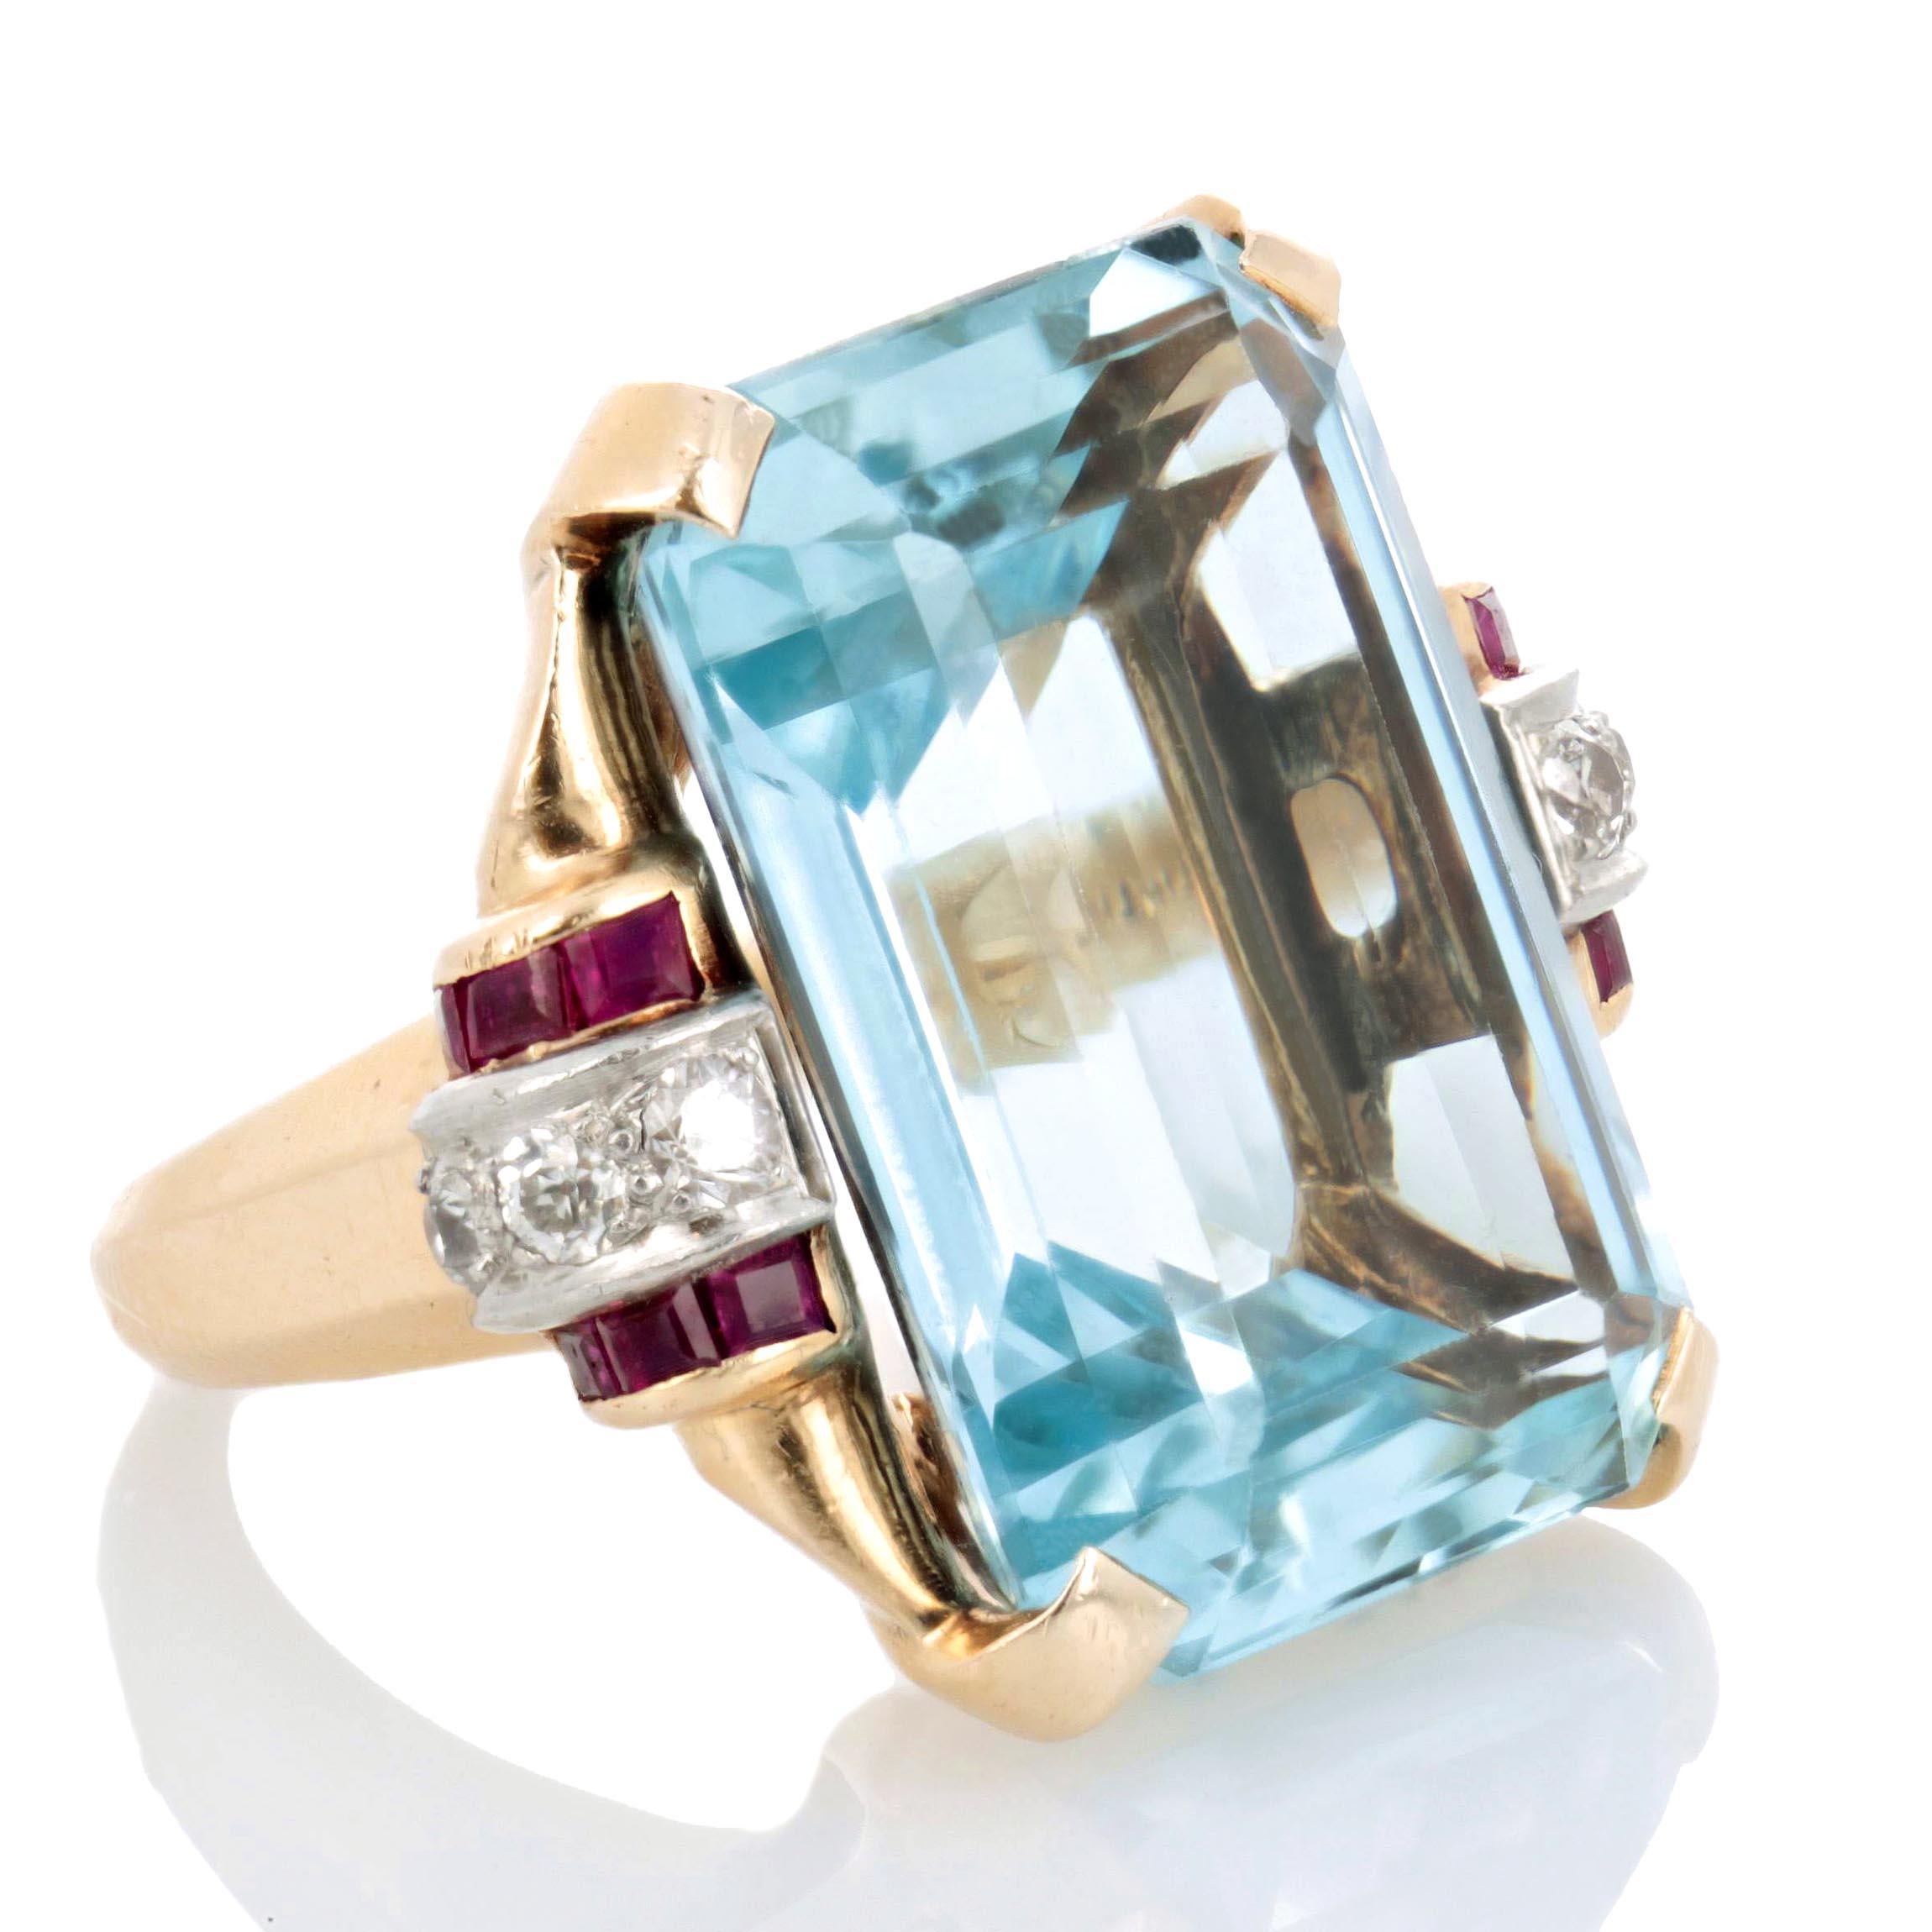 Set with an emerald-cut aquamarine weighing approximately 24 carats, with old-cut diamonds and calibré-cut ruby accents on both shoulders, mounted in platinum and 14K yellow gold.  Circa 1940 size 4.75.

* More photos by request
* FREE shipping